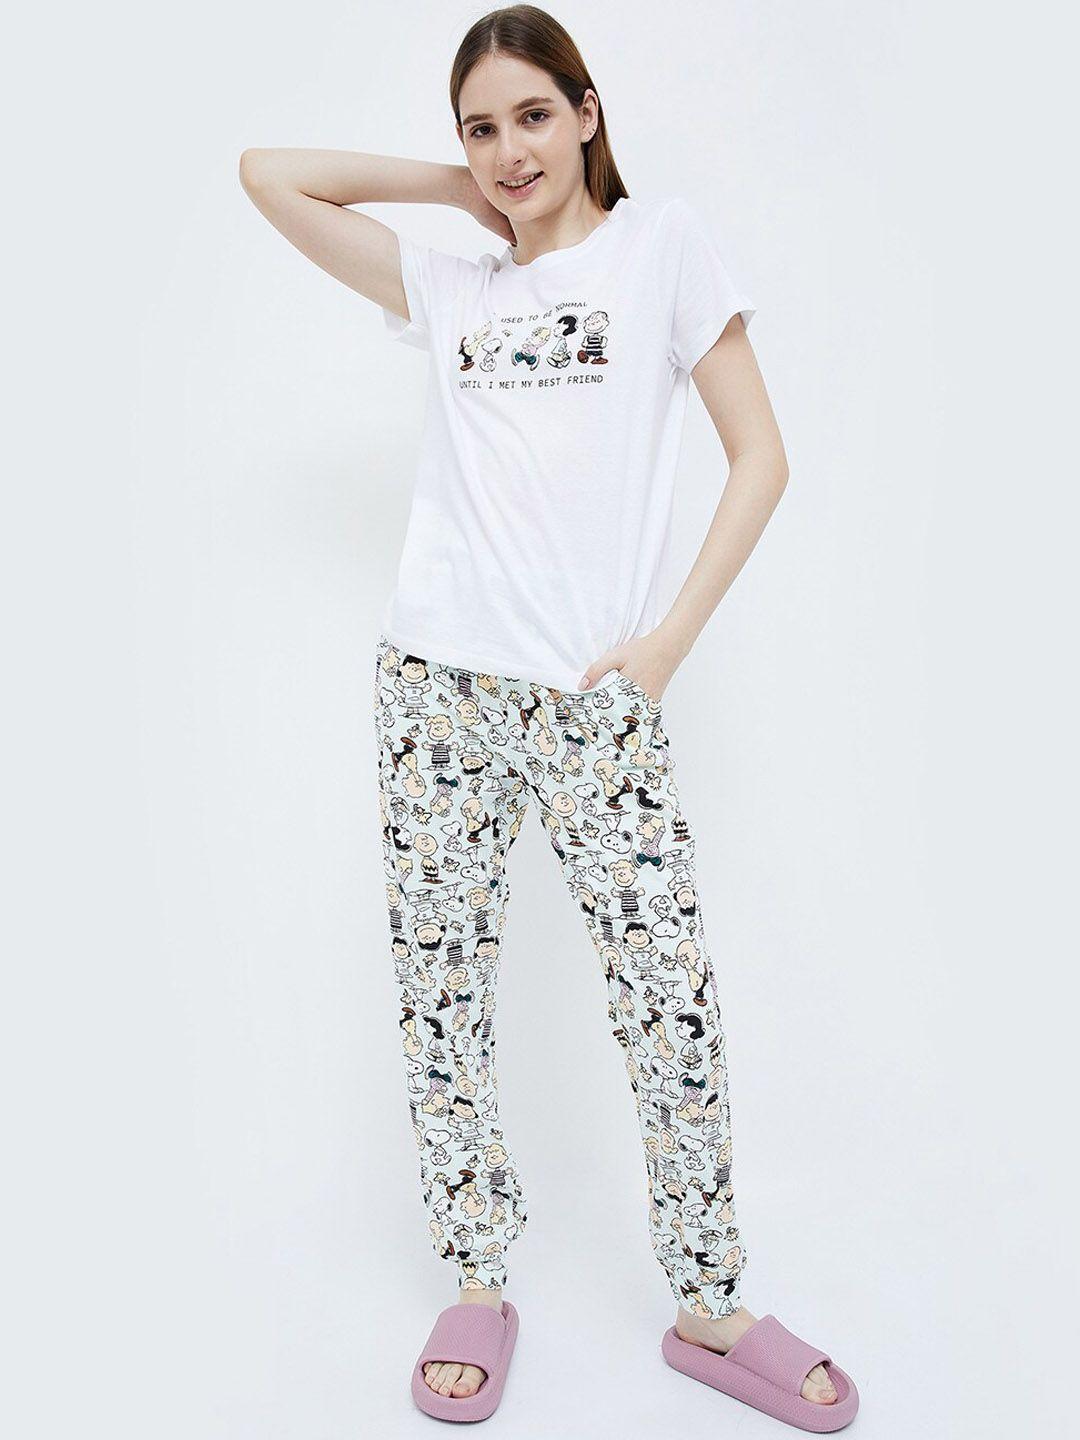 ginger by lifestyle snoopy printed pure cotton night suit